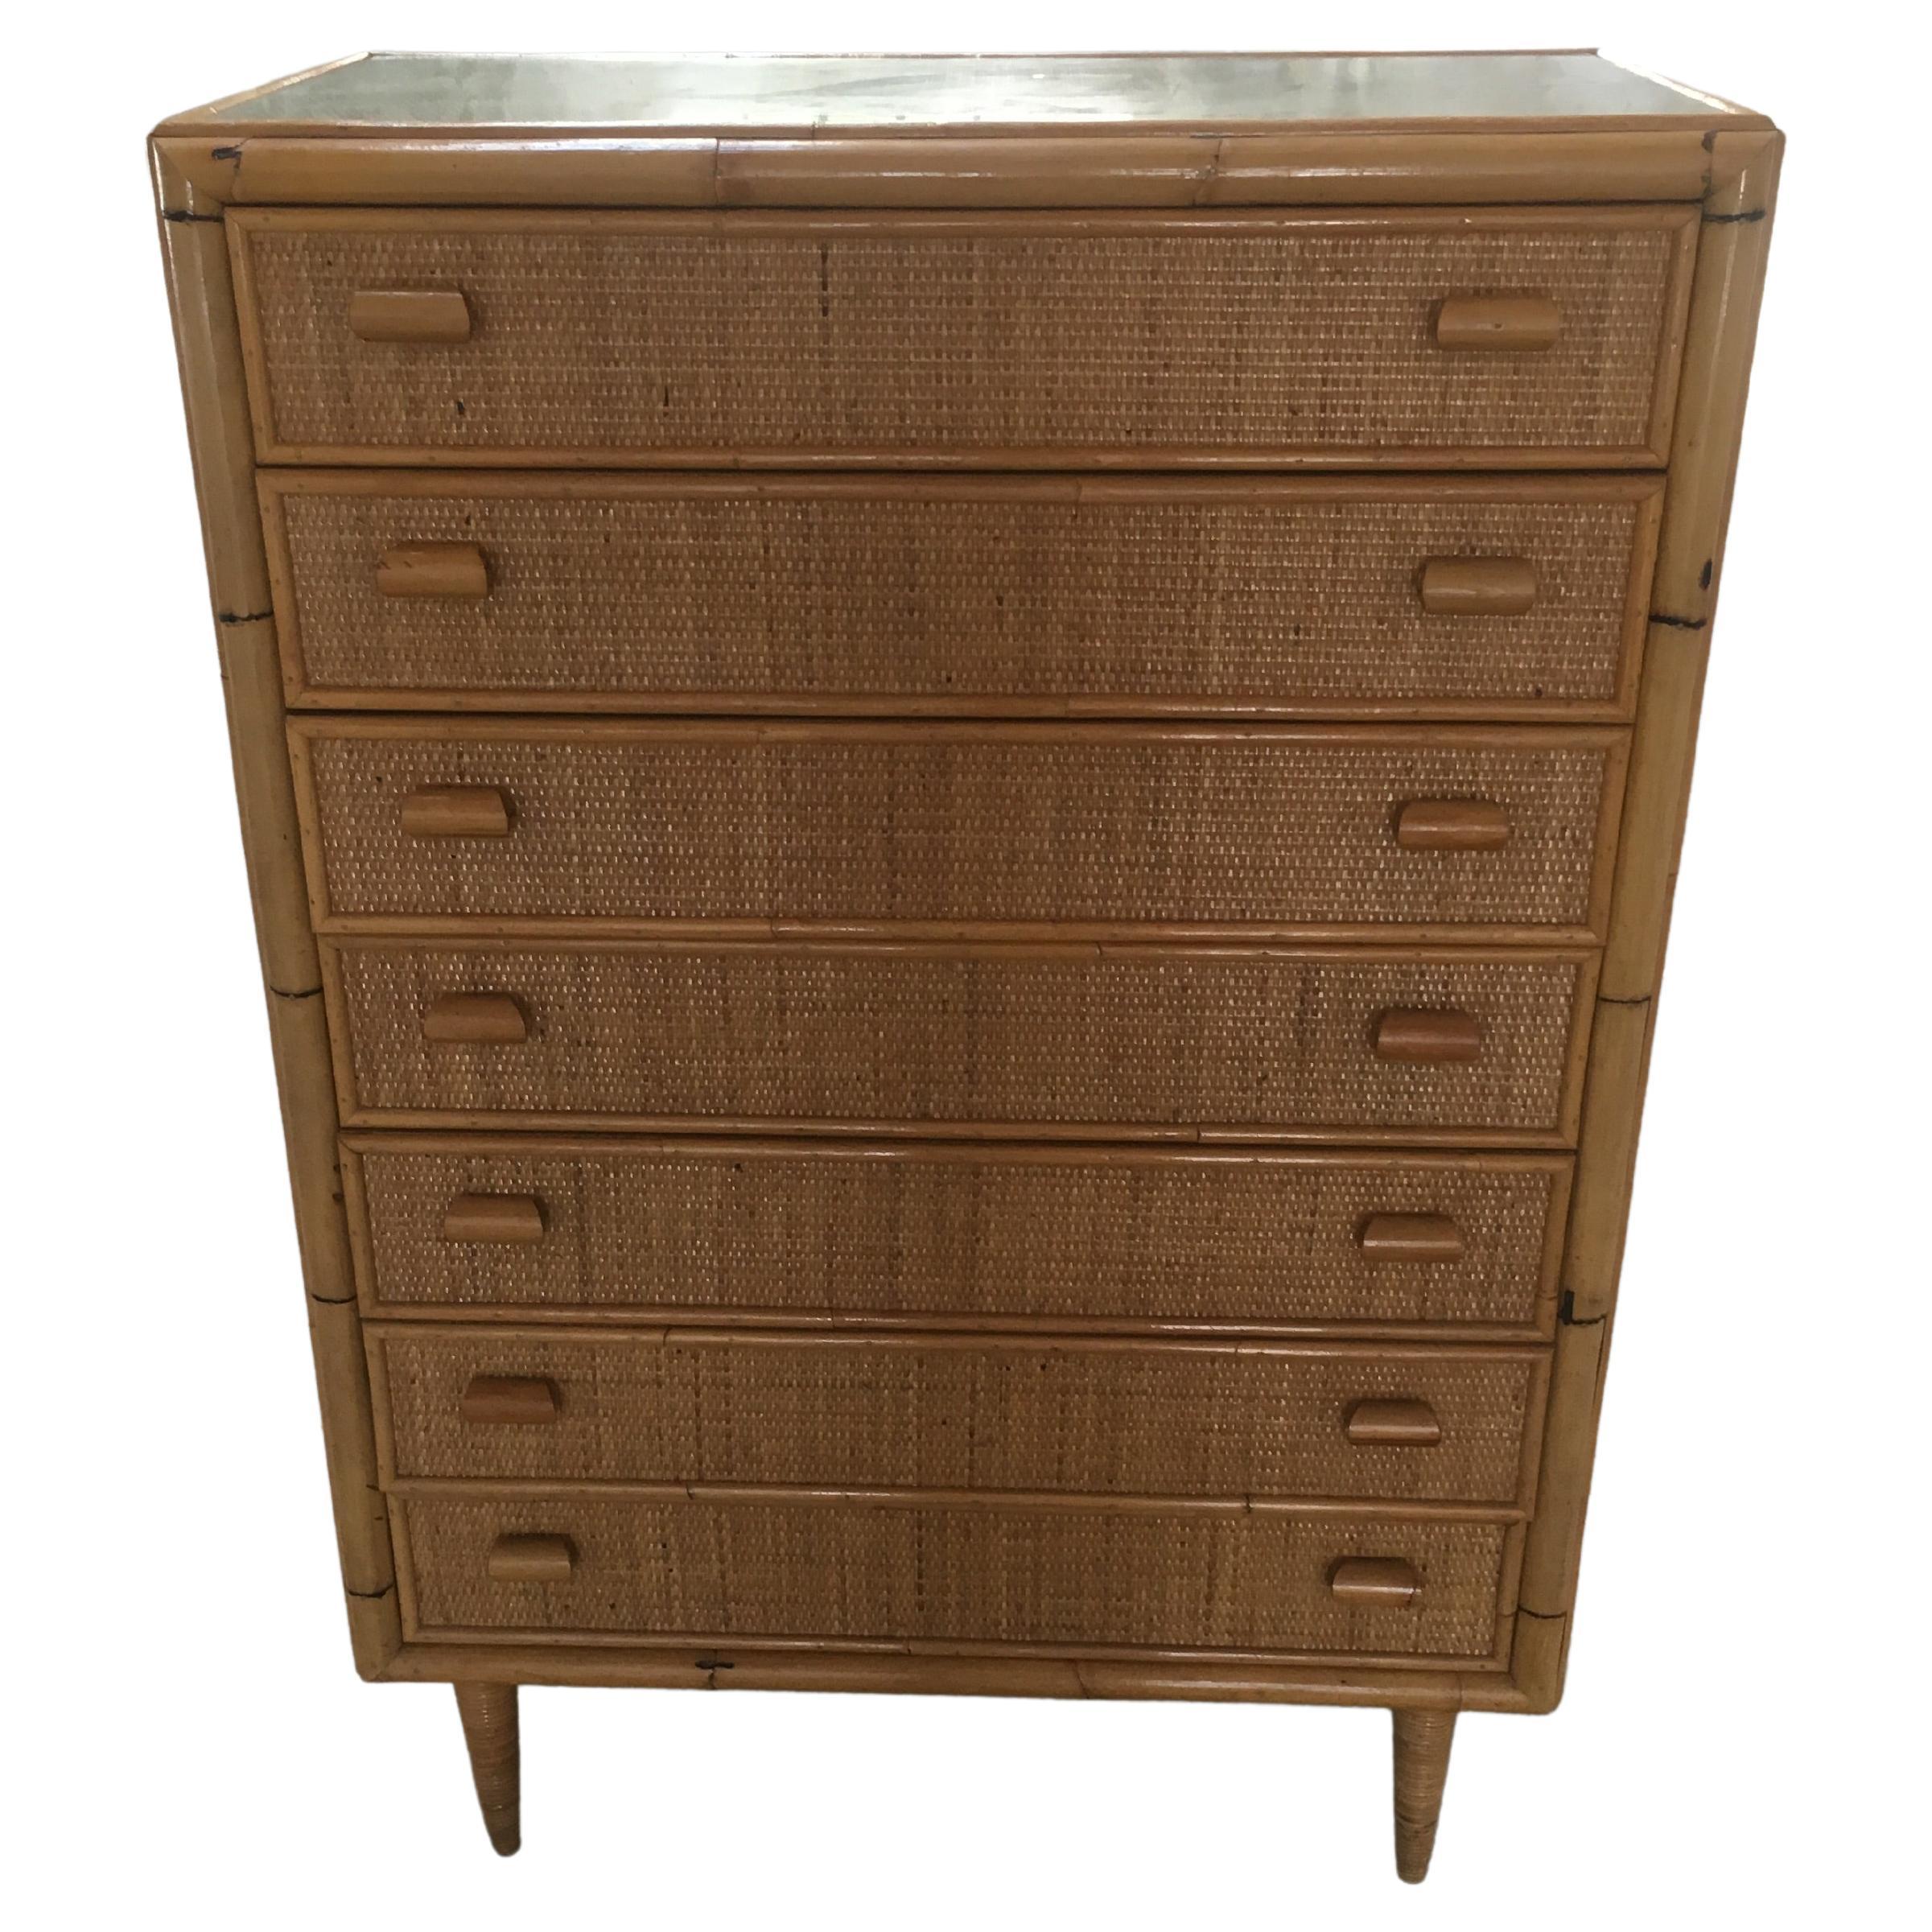 Mid-Century Modern Italian Bamboo Chest of Drawers or Commode, 1970s